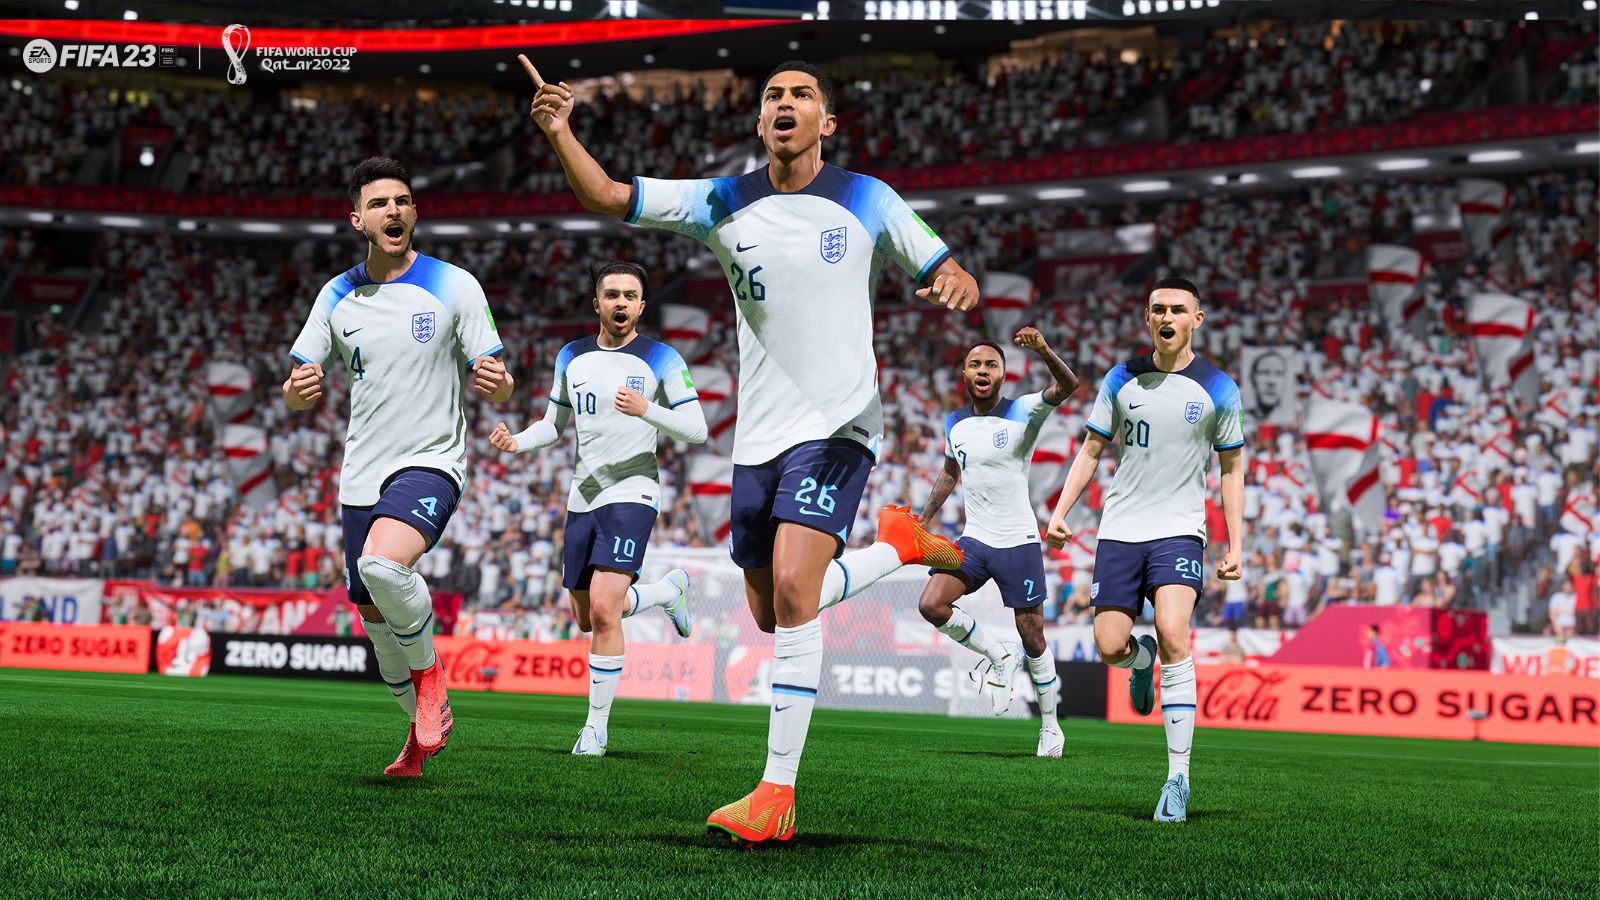 FIFA 23 World Cup player ratings revealed: Messi, Ronaldo, Mbappe, more